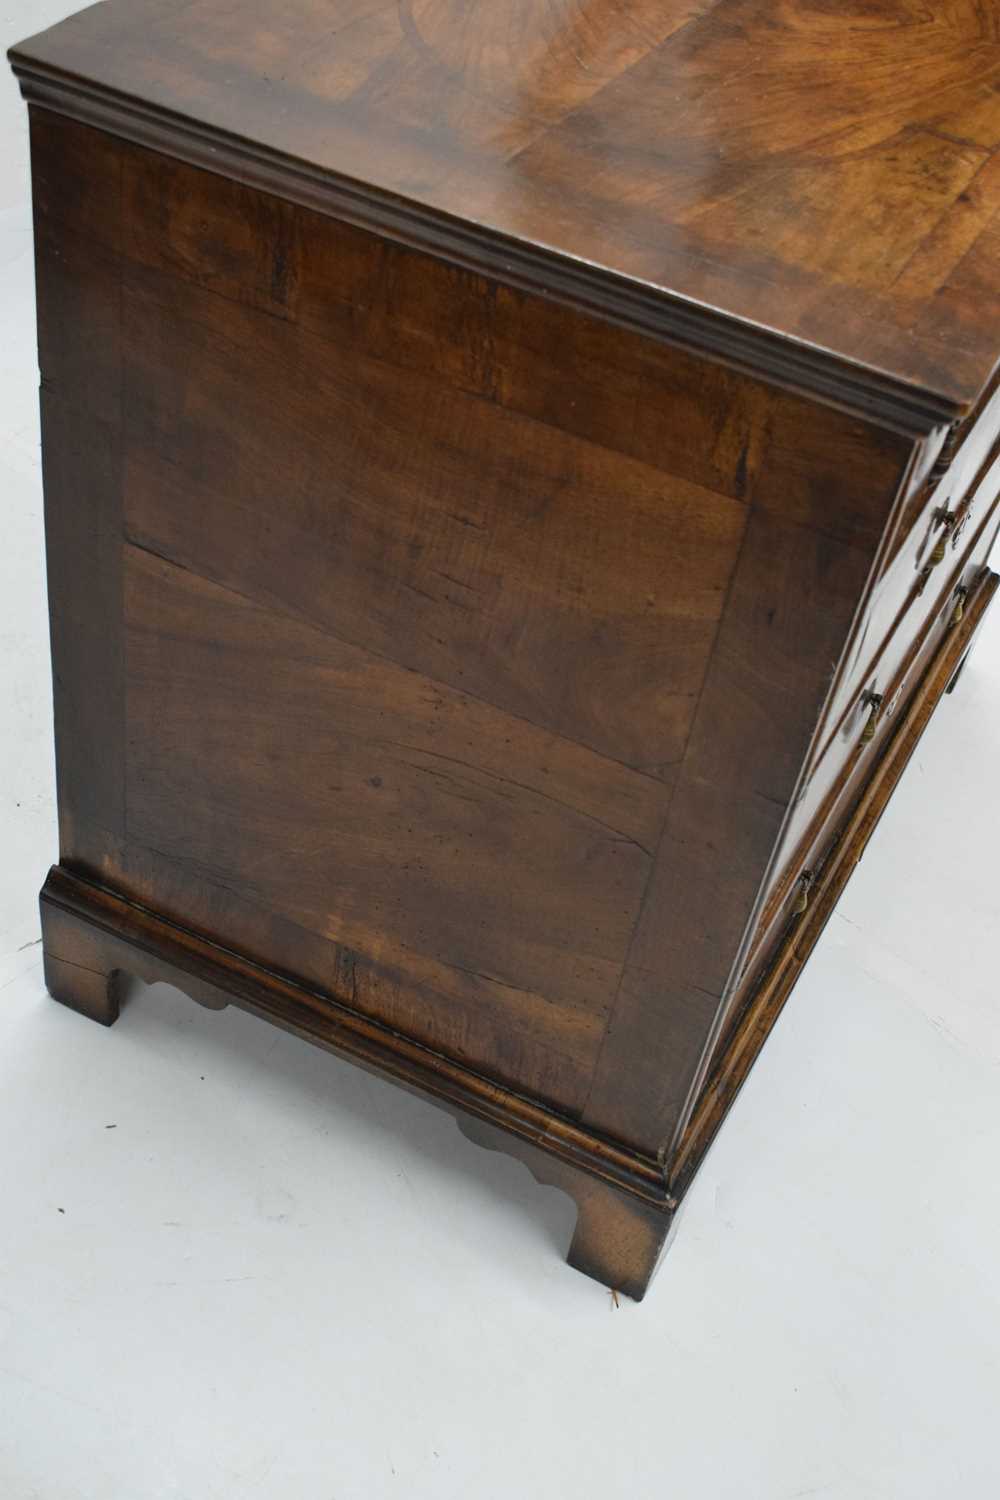 Early 18th century walnut chest of drawers - Image 12 of 20